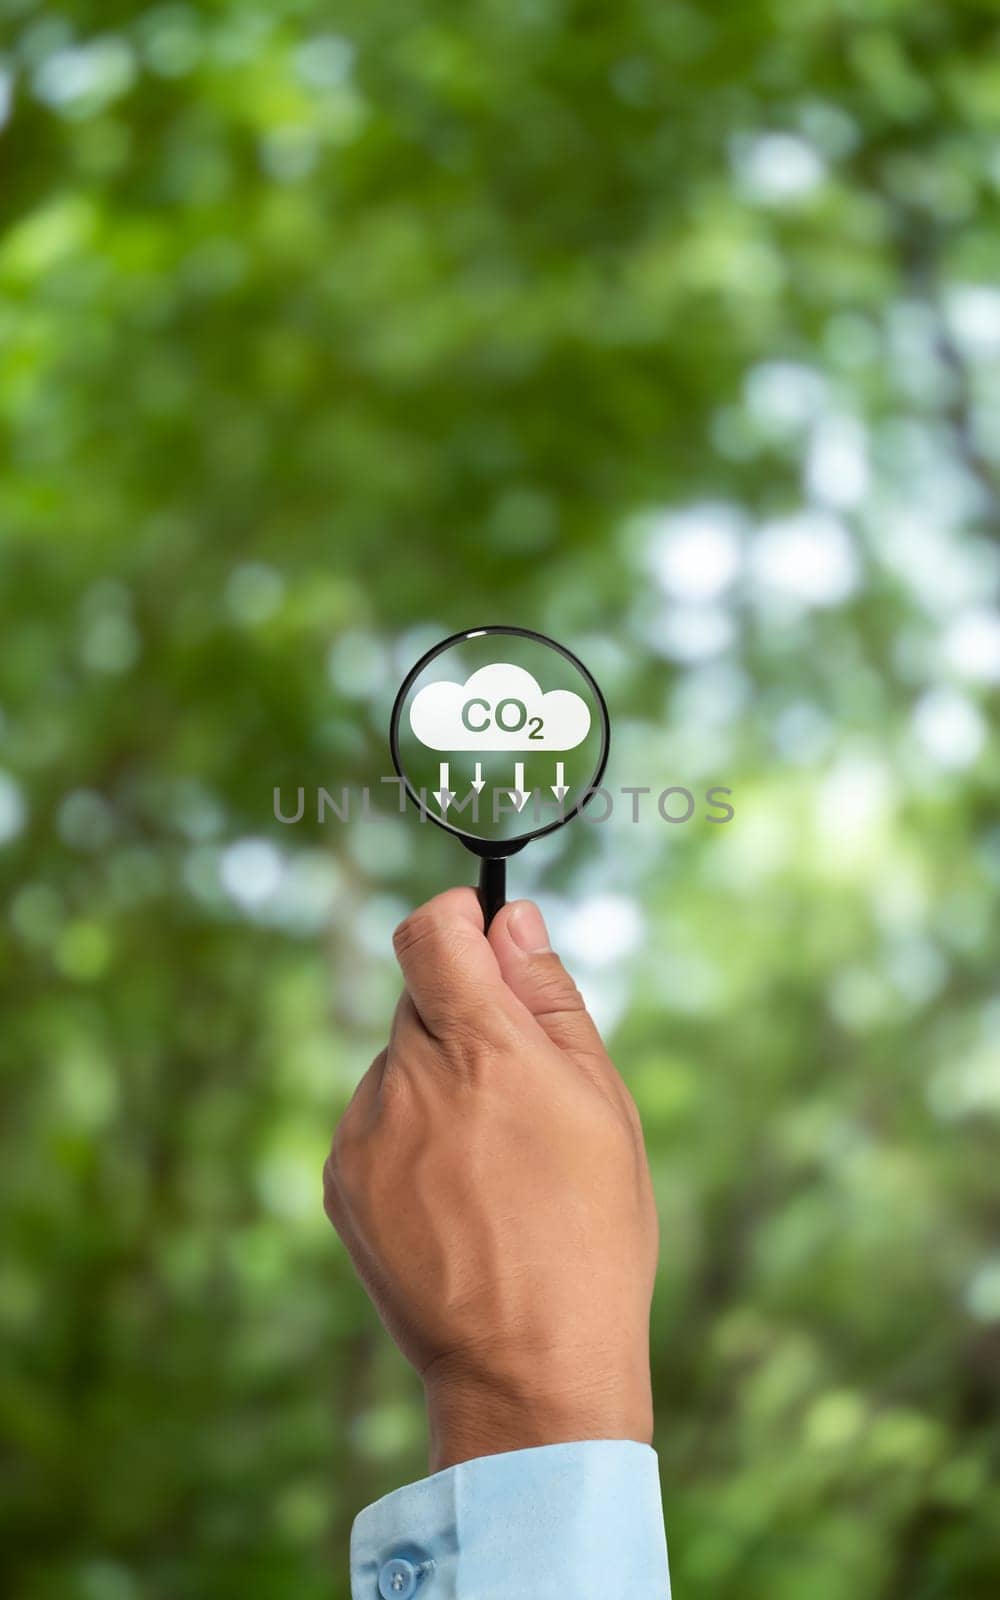 A clean and friendly environment without carbon dioxide emissions, Hand holding magnifying glass with CO2 reduction icon inside, carbon credit to limit global warming from climate change, carbon neutral. by Unimages2527